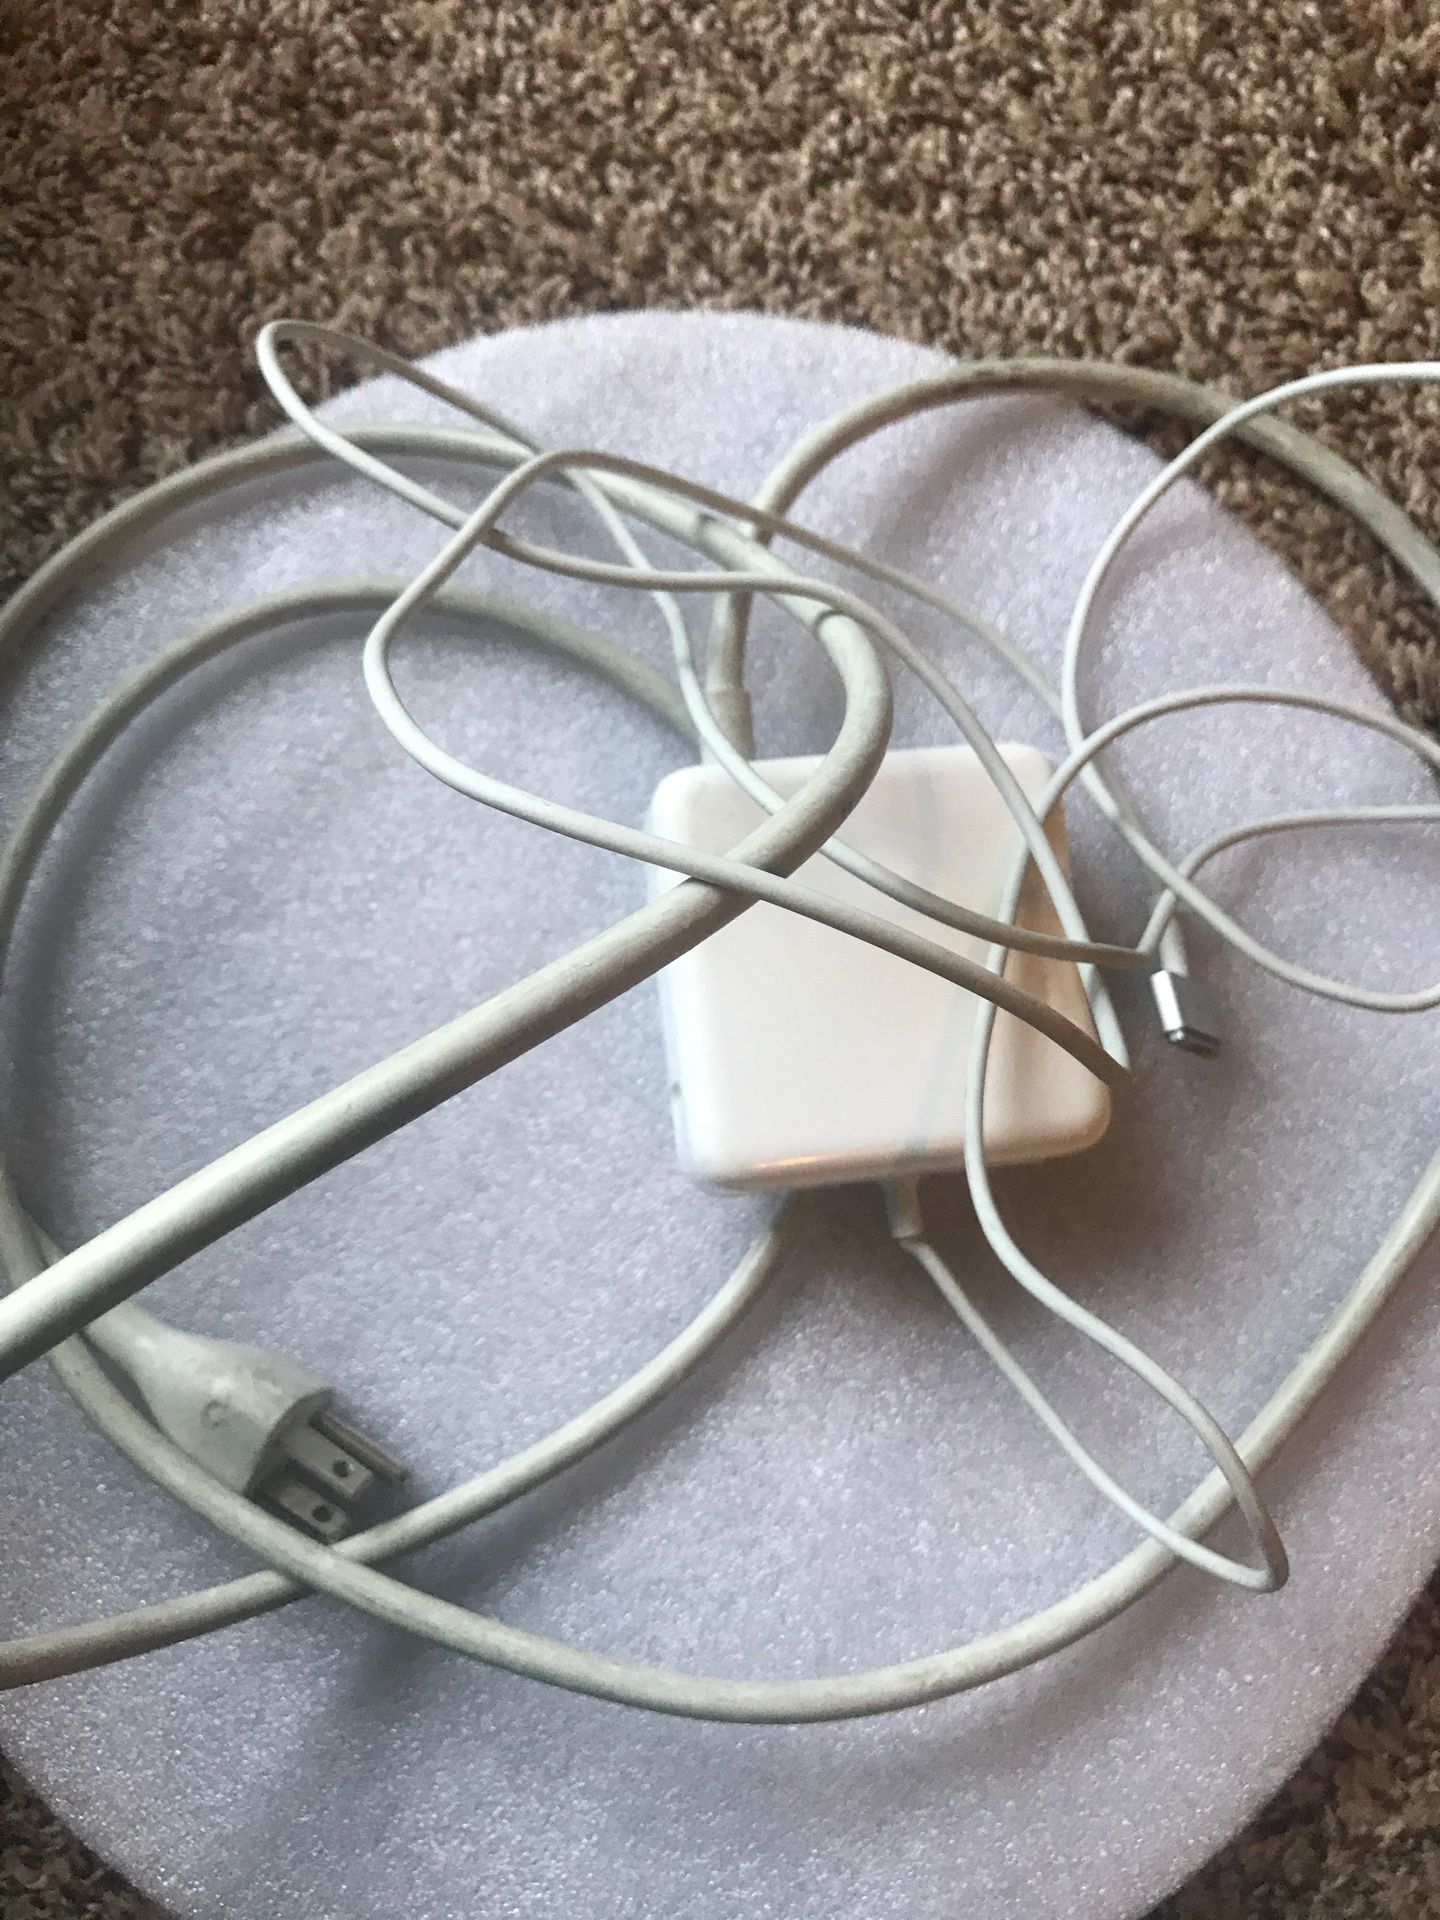 Apple replacement power cord !